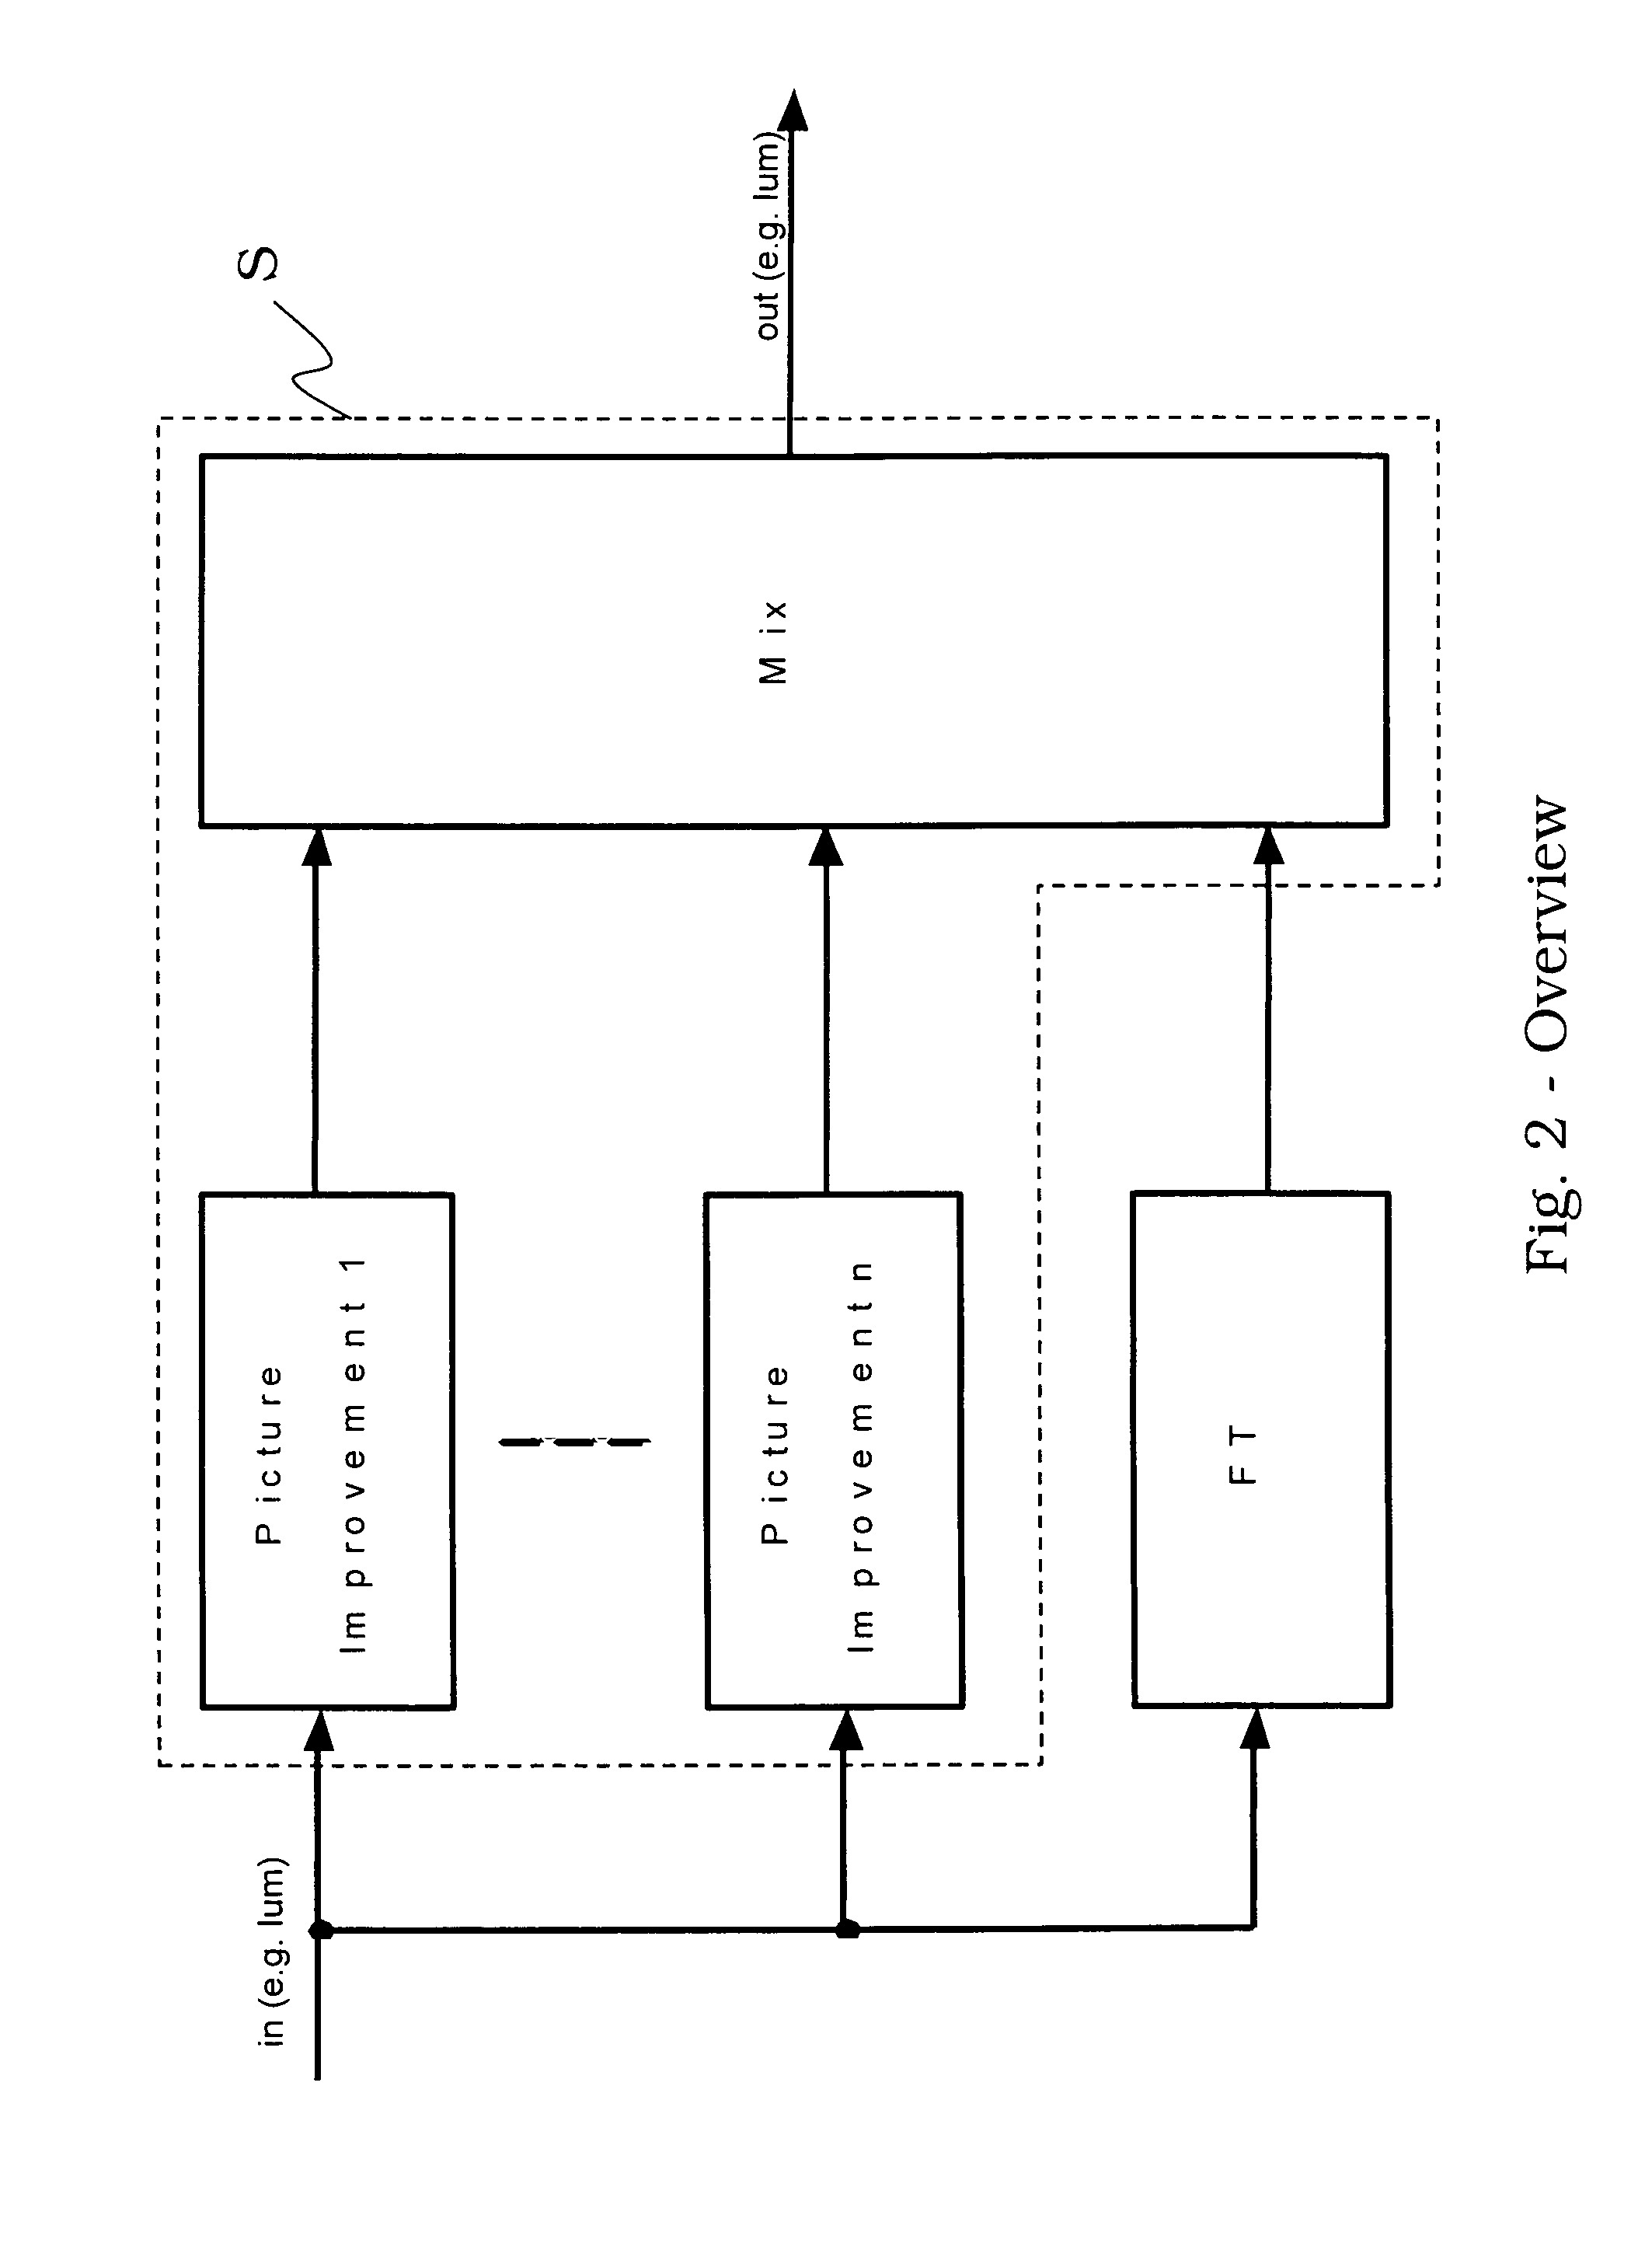 Method for Discriminating Textures Regions and Homogeneous or Flat Regions in an Image and Methods for Estimating Noise in an Image Sequence